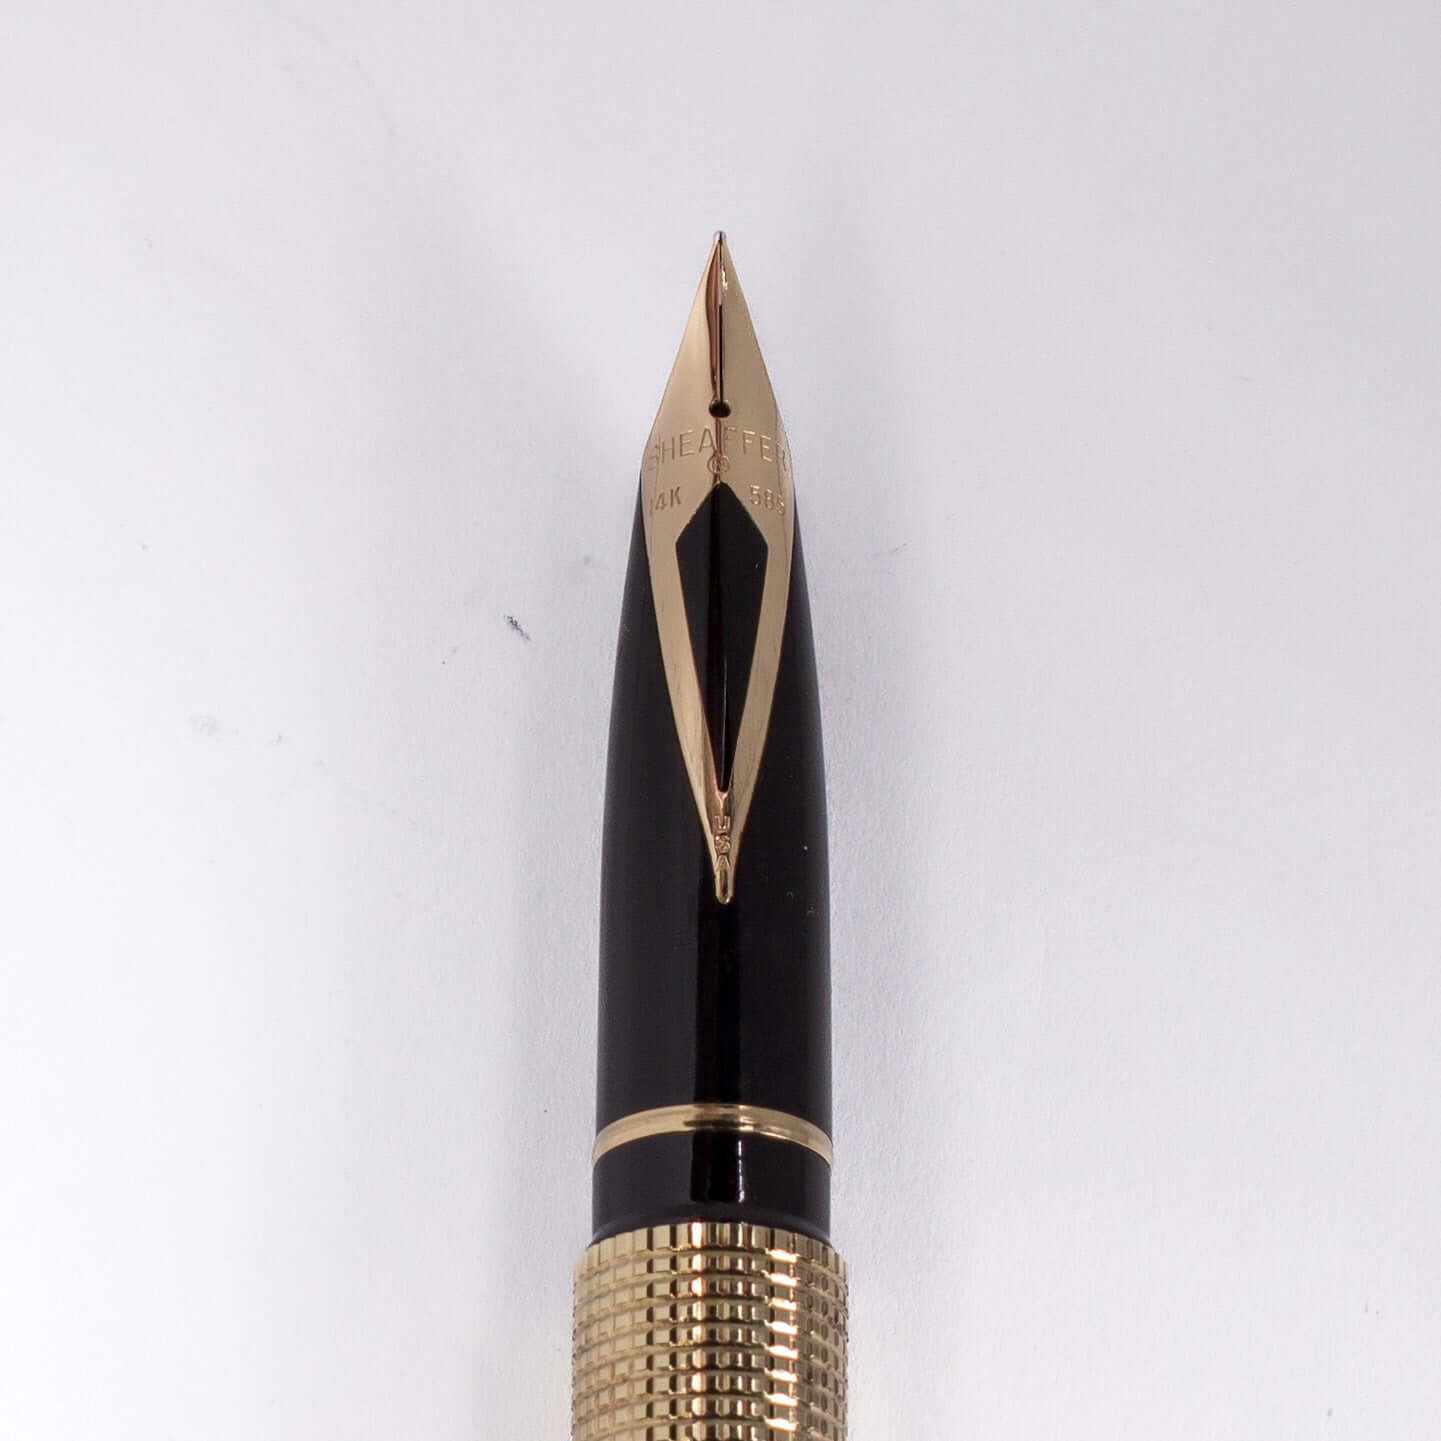 ${titleName/Type: Sheaffer Targa Fountain Pen/Ballpoint Set Manufacture Year: 1980's Length: 5 5/16 Filling System: Sheaffer Cartridge or Converter Color/Pattern: Gold Plated Basket Weave Nib Type/Condition and remarks: Fine 14K Inlaid Nib Condition: ﻿Exc